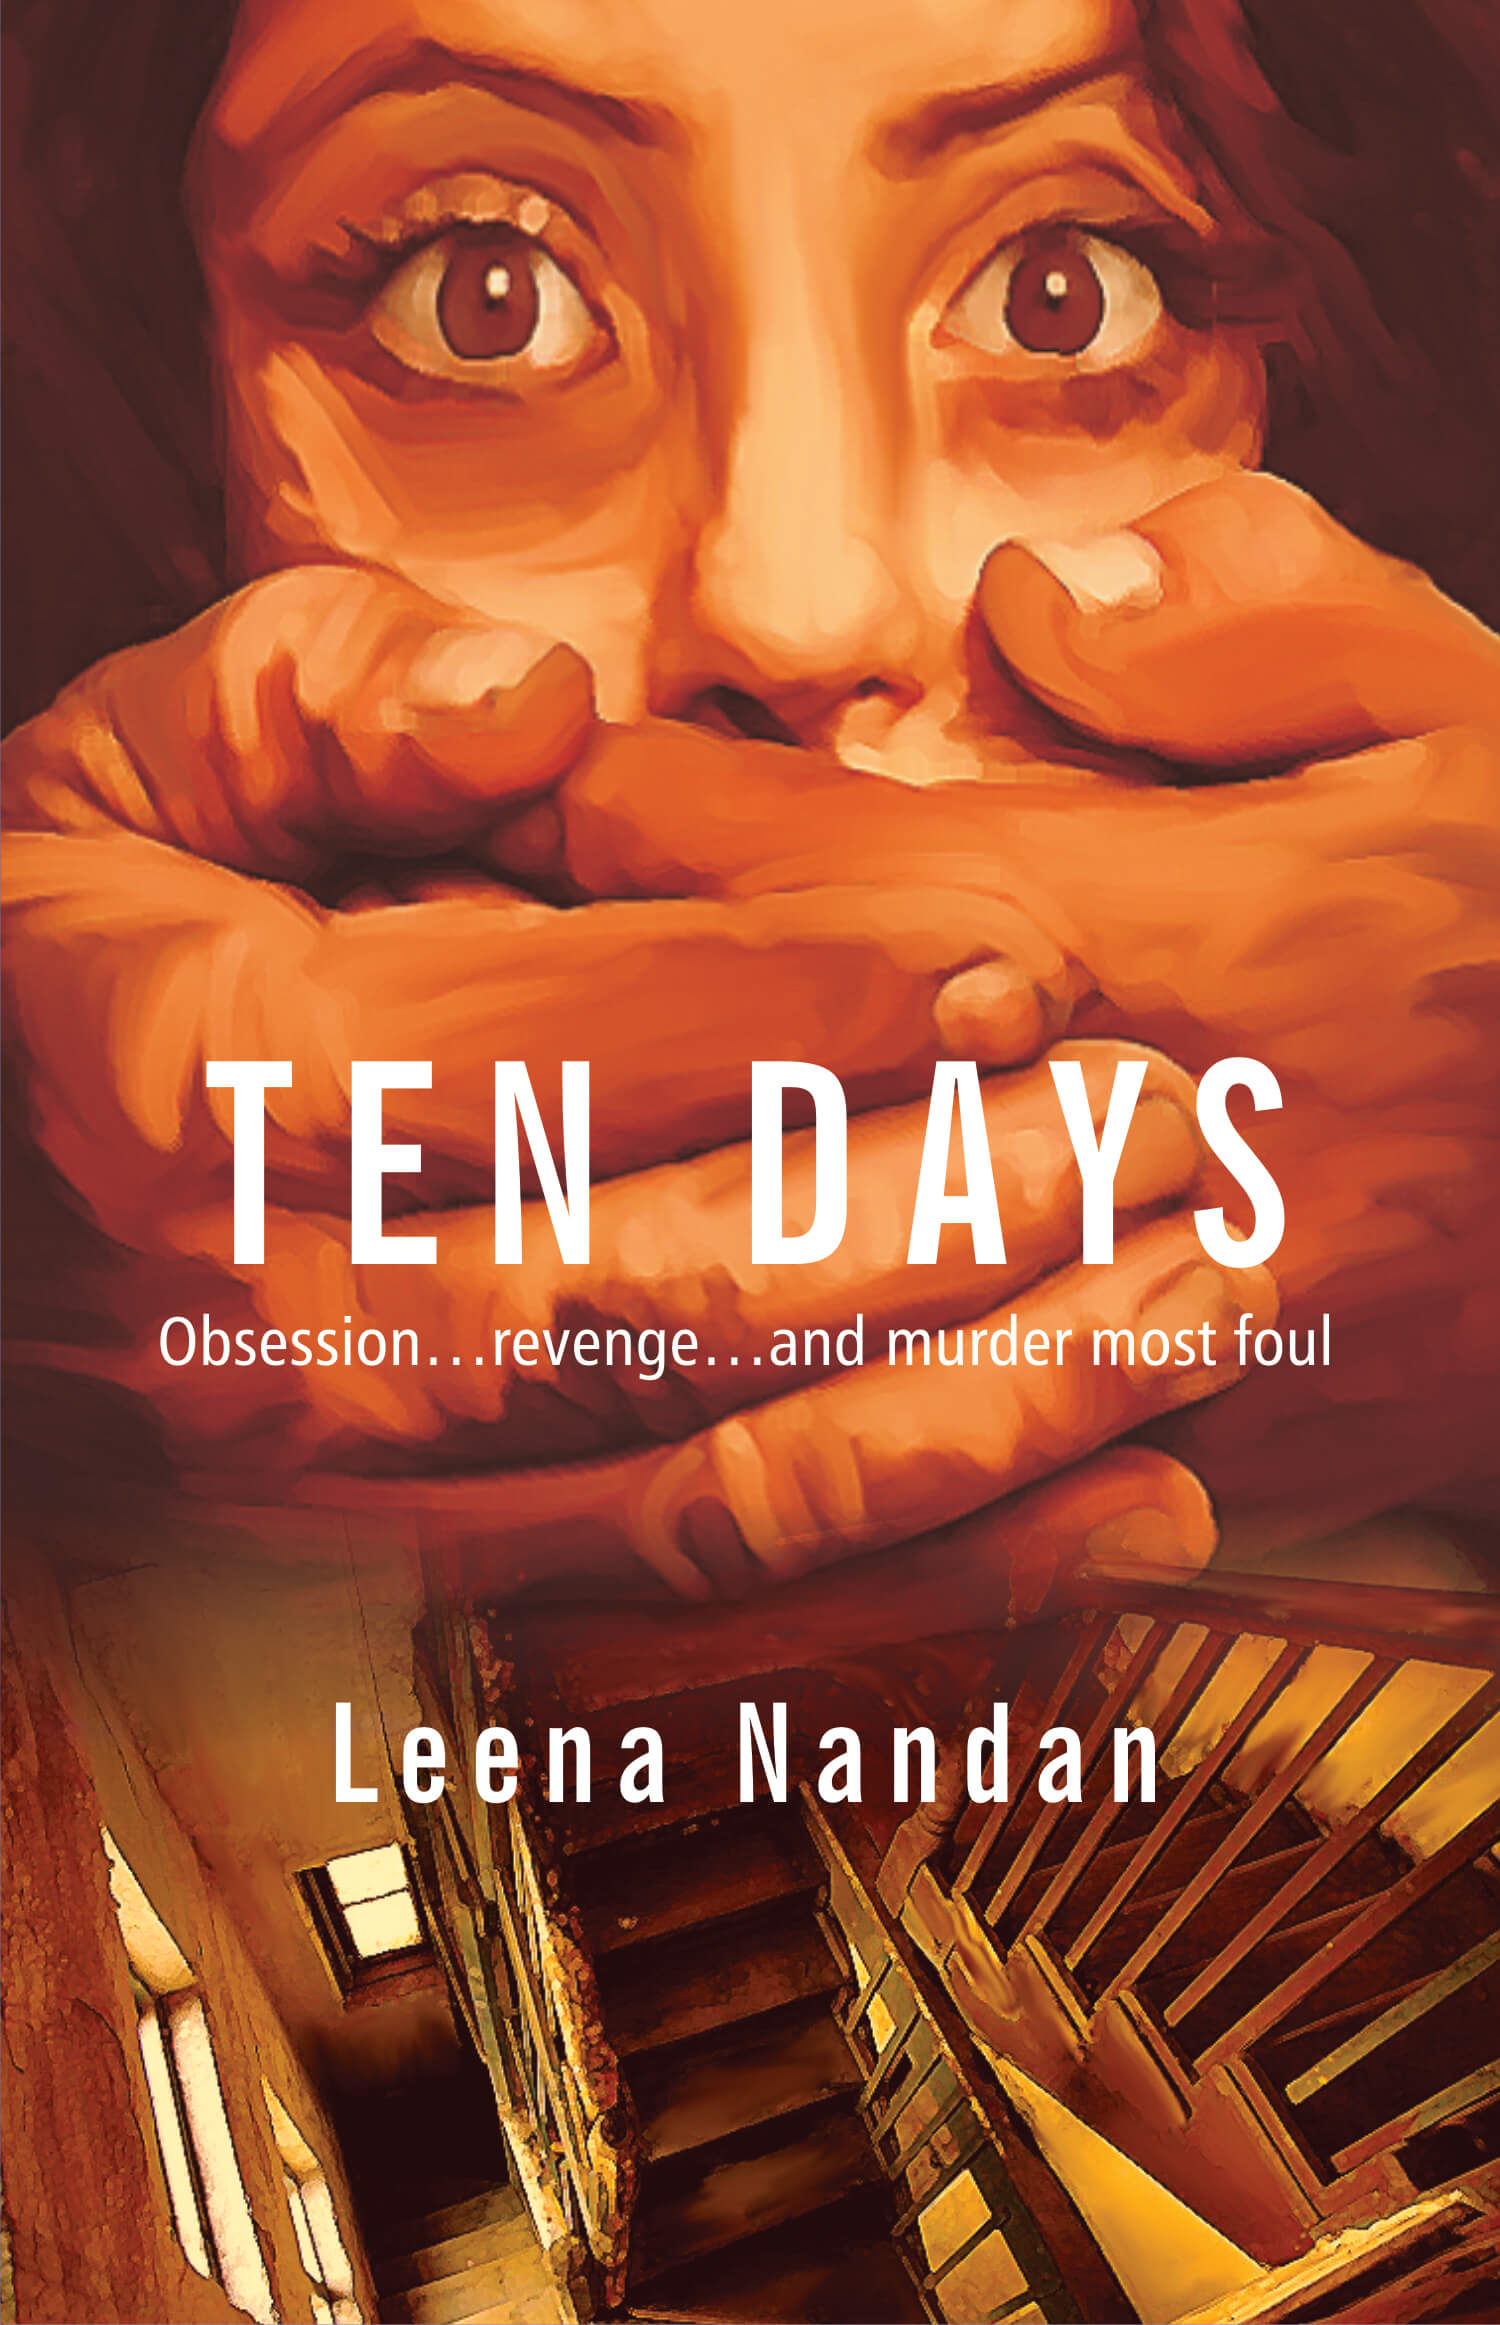 Ten Days: Obsession...Revenge...and Murder most Foul